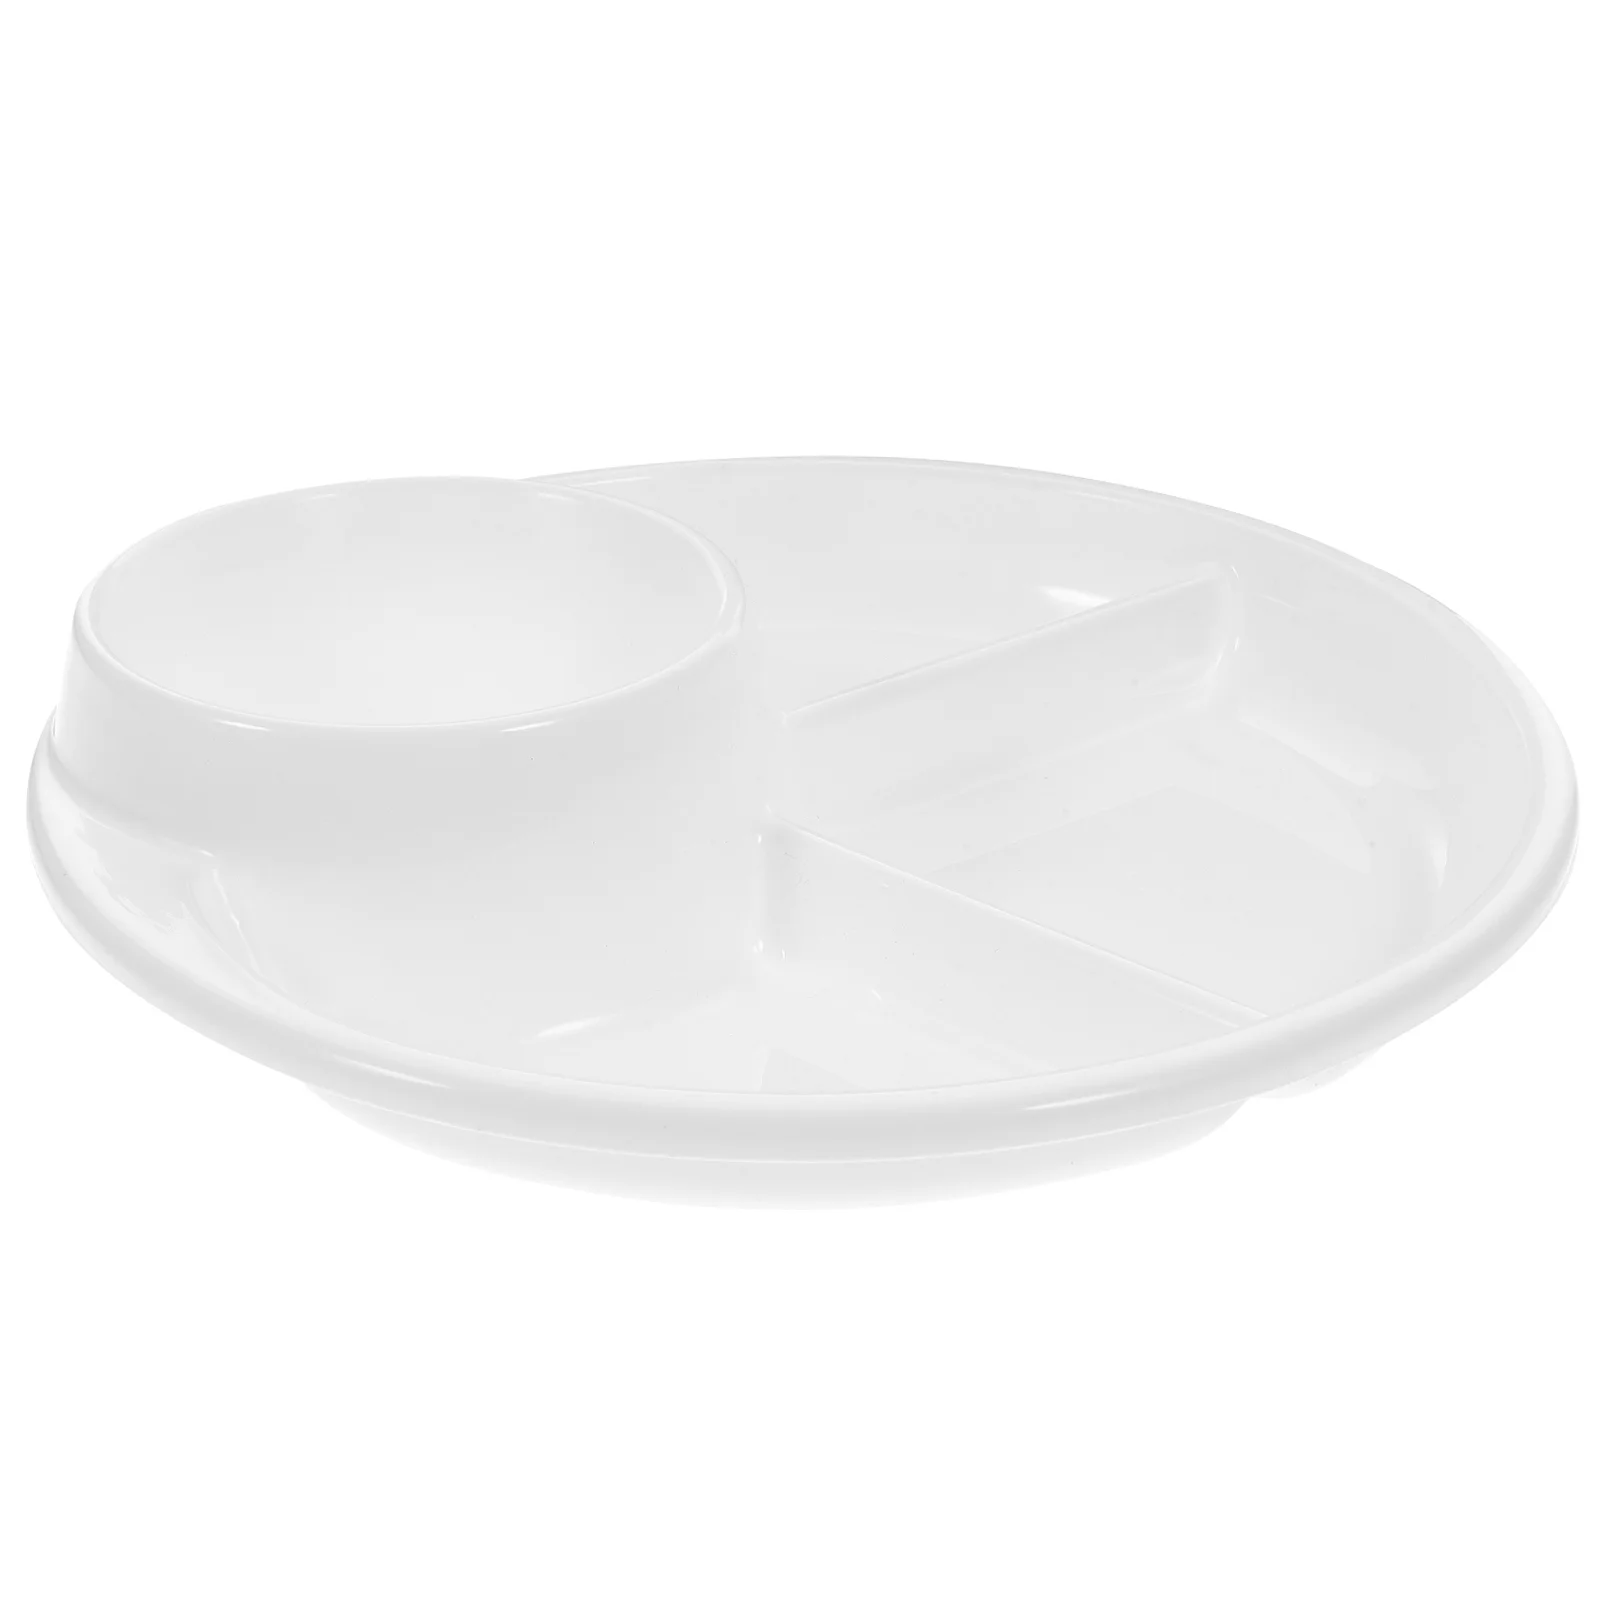 

Compartment Plate Divided Dish Simple Dinner White Plastic Plates Breakfast Reduce Fat Food Tableware Display